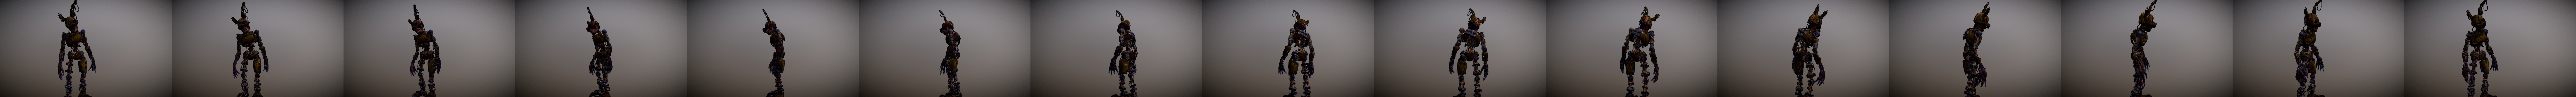 FNAF Security Breach Characters - A 3D model collection by MarshArt -  Sketchfab